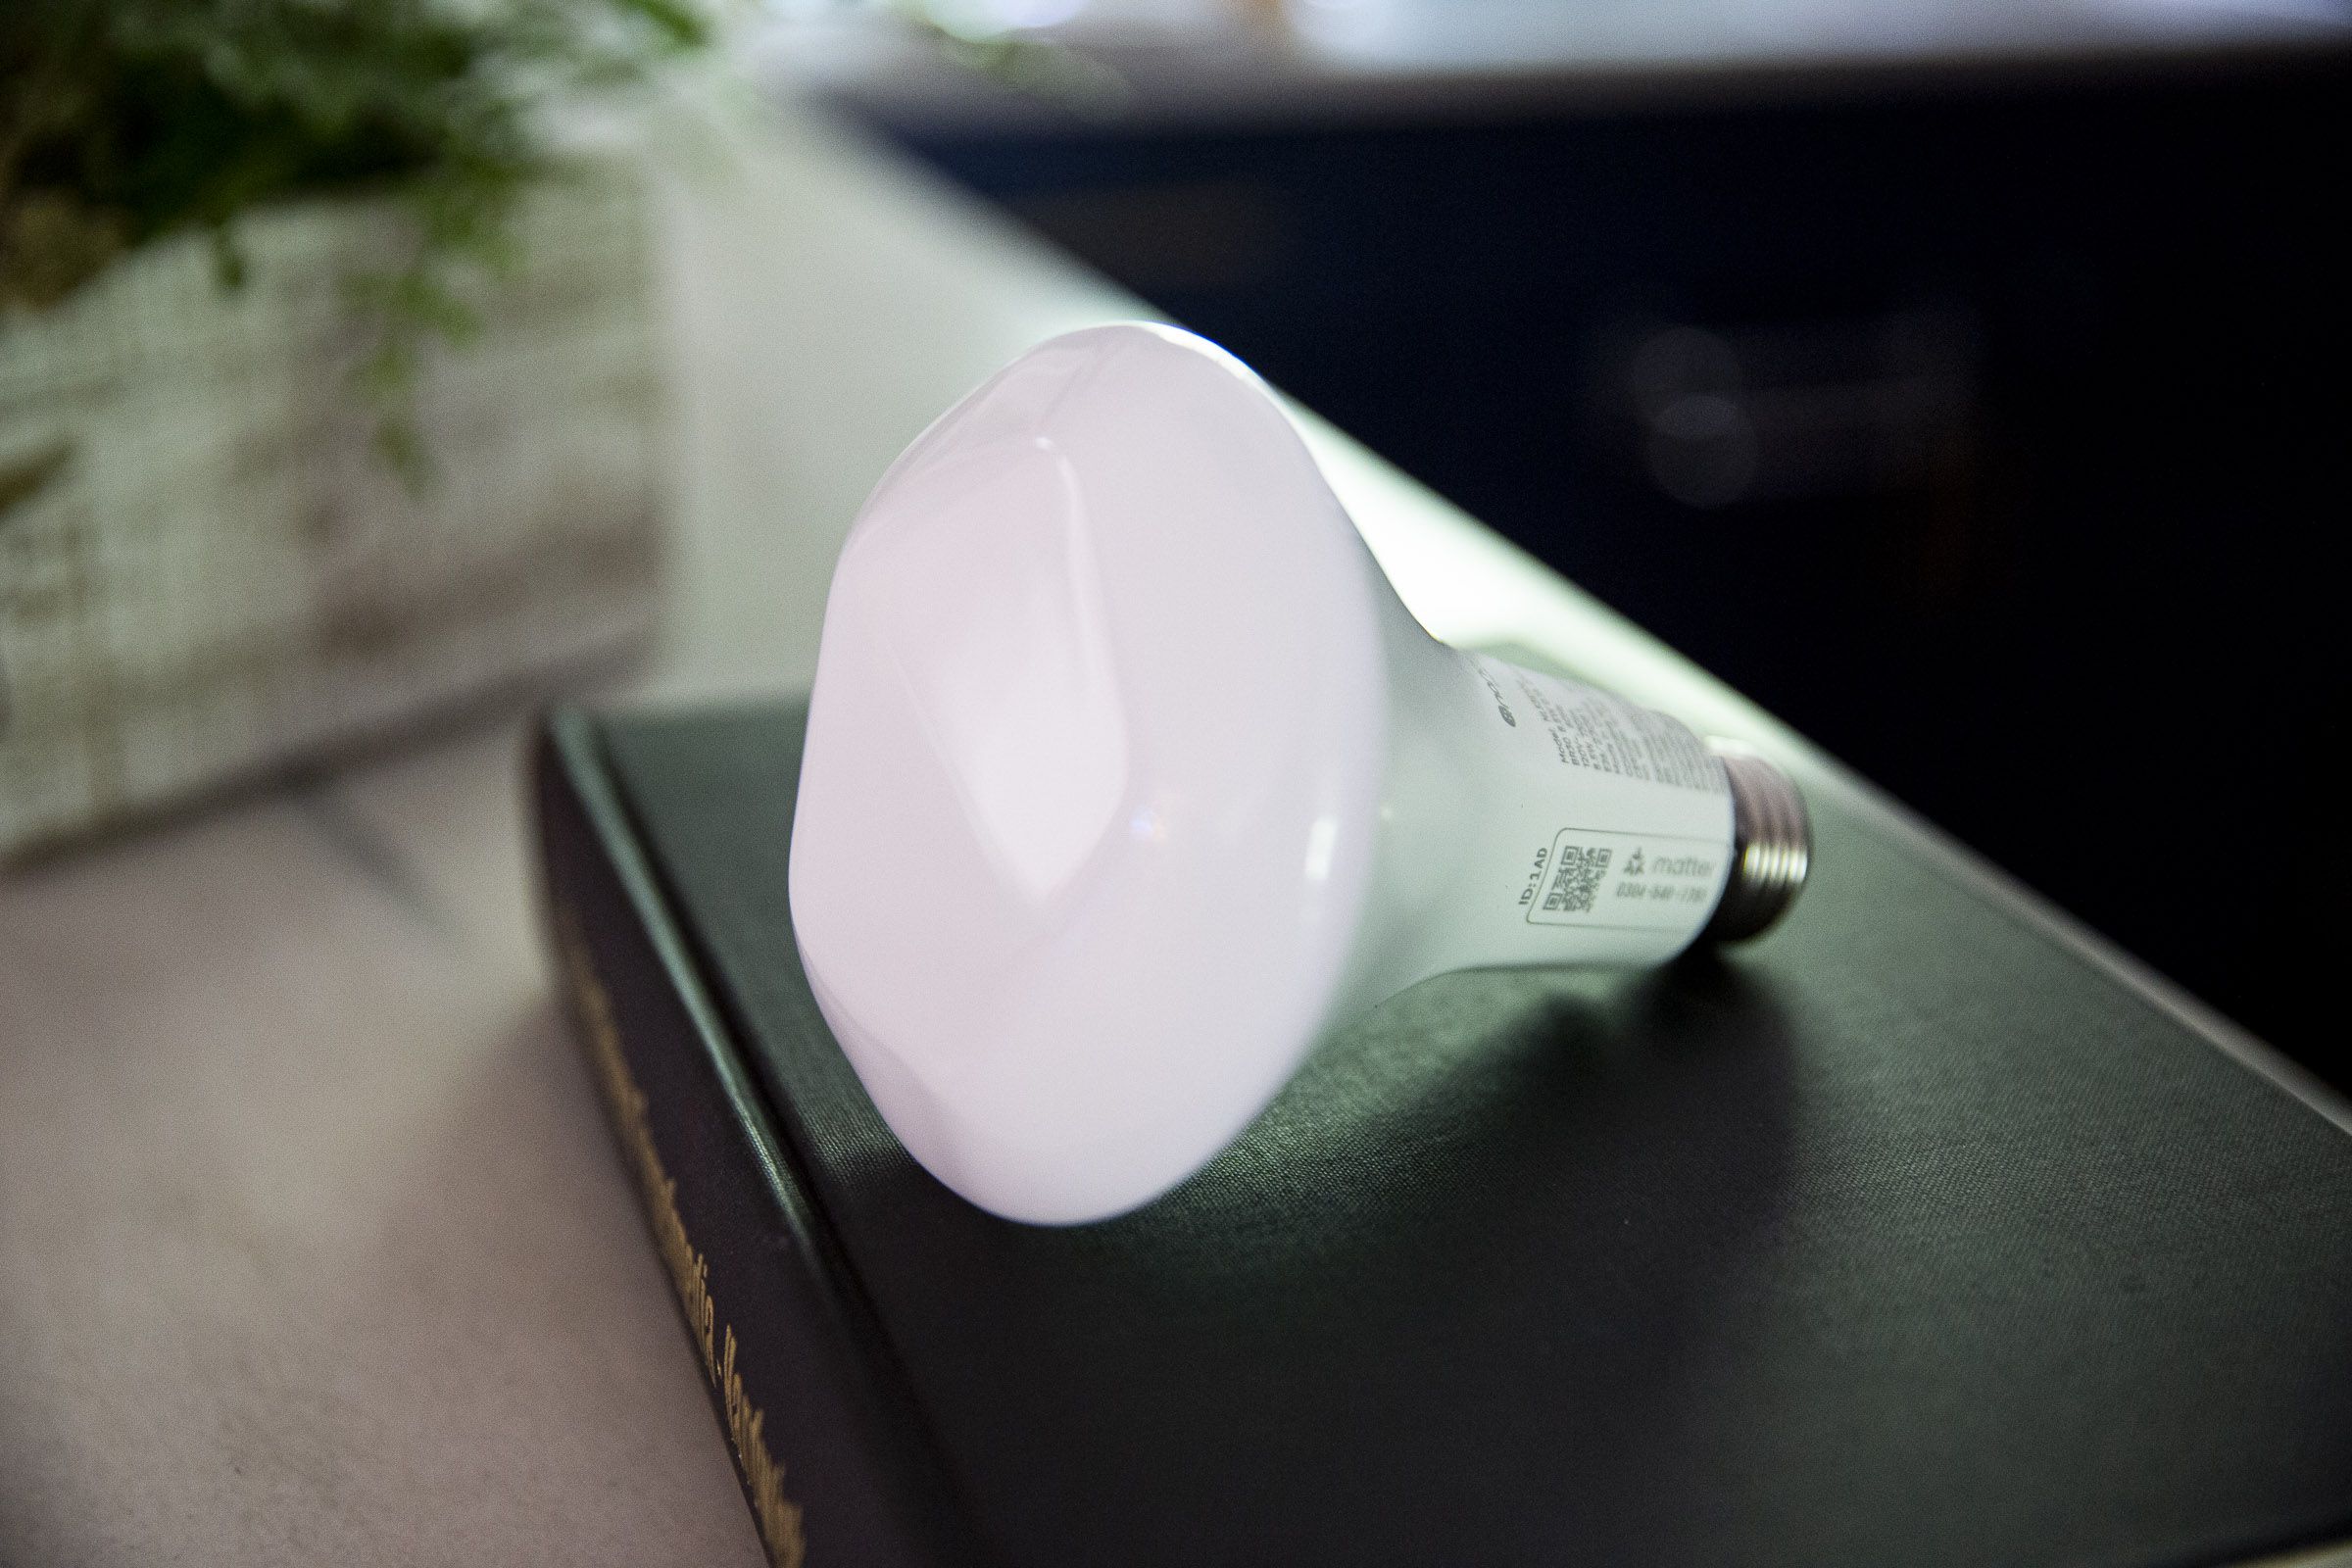 A smart bulb on a book on a kitchen counter.